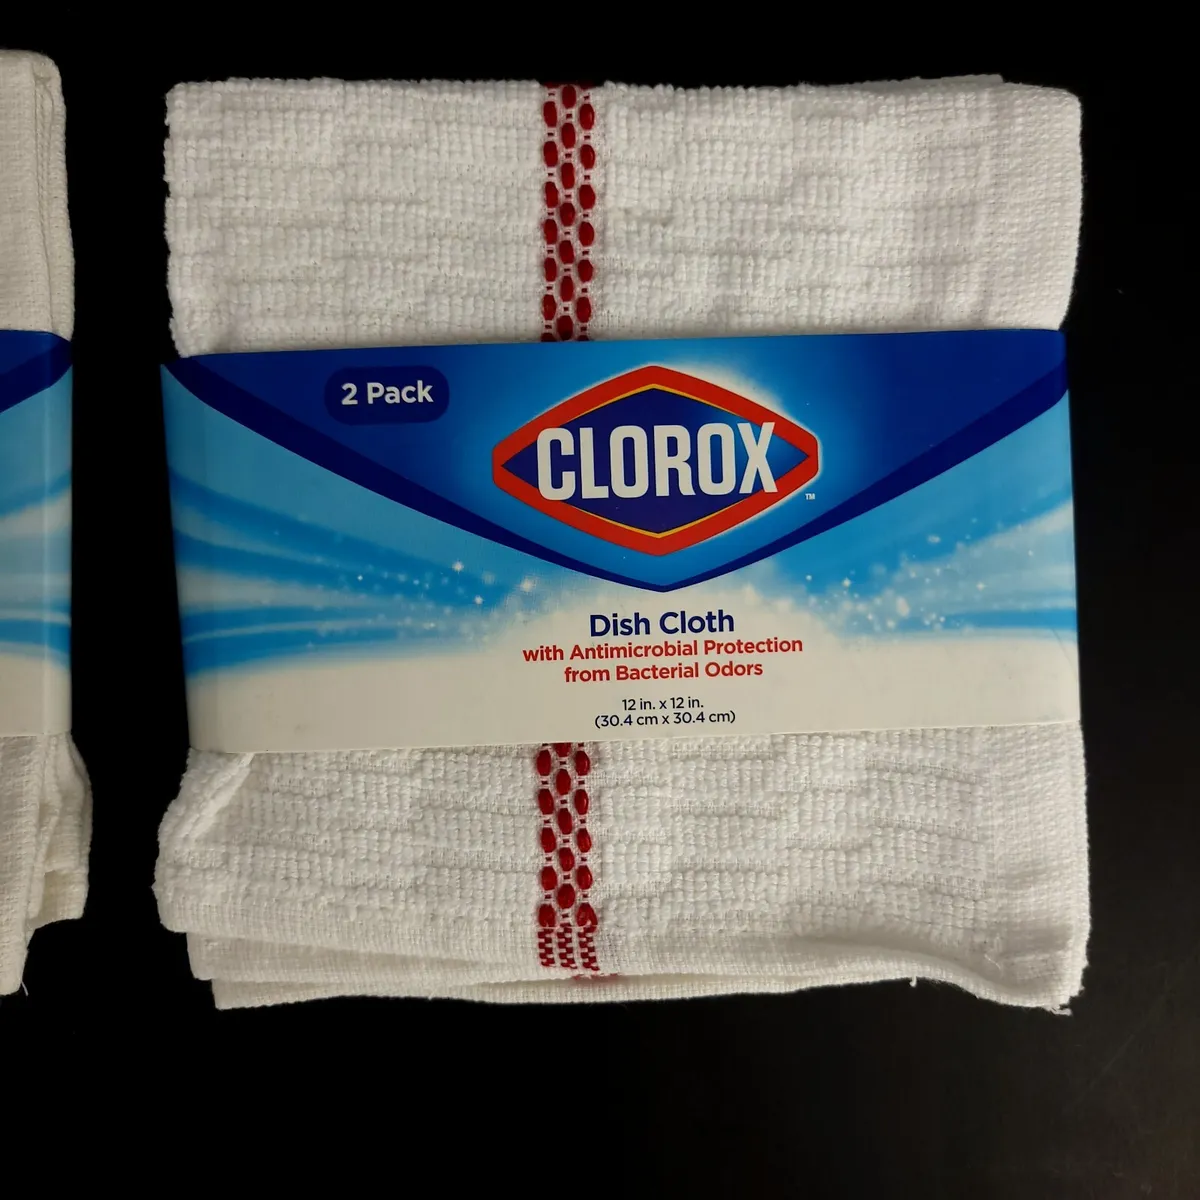 (Lot of 2) Clorox Dish Cloth White Red Stripe Antimicrobial Protection  12x12